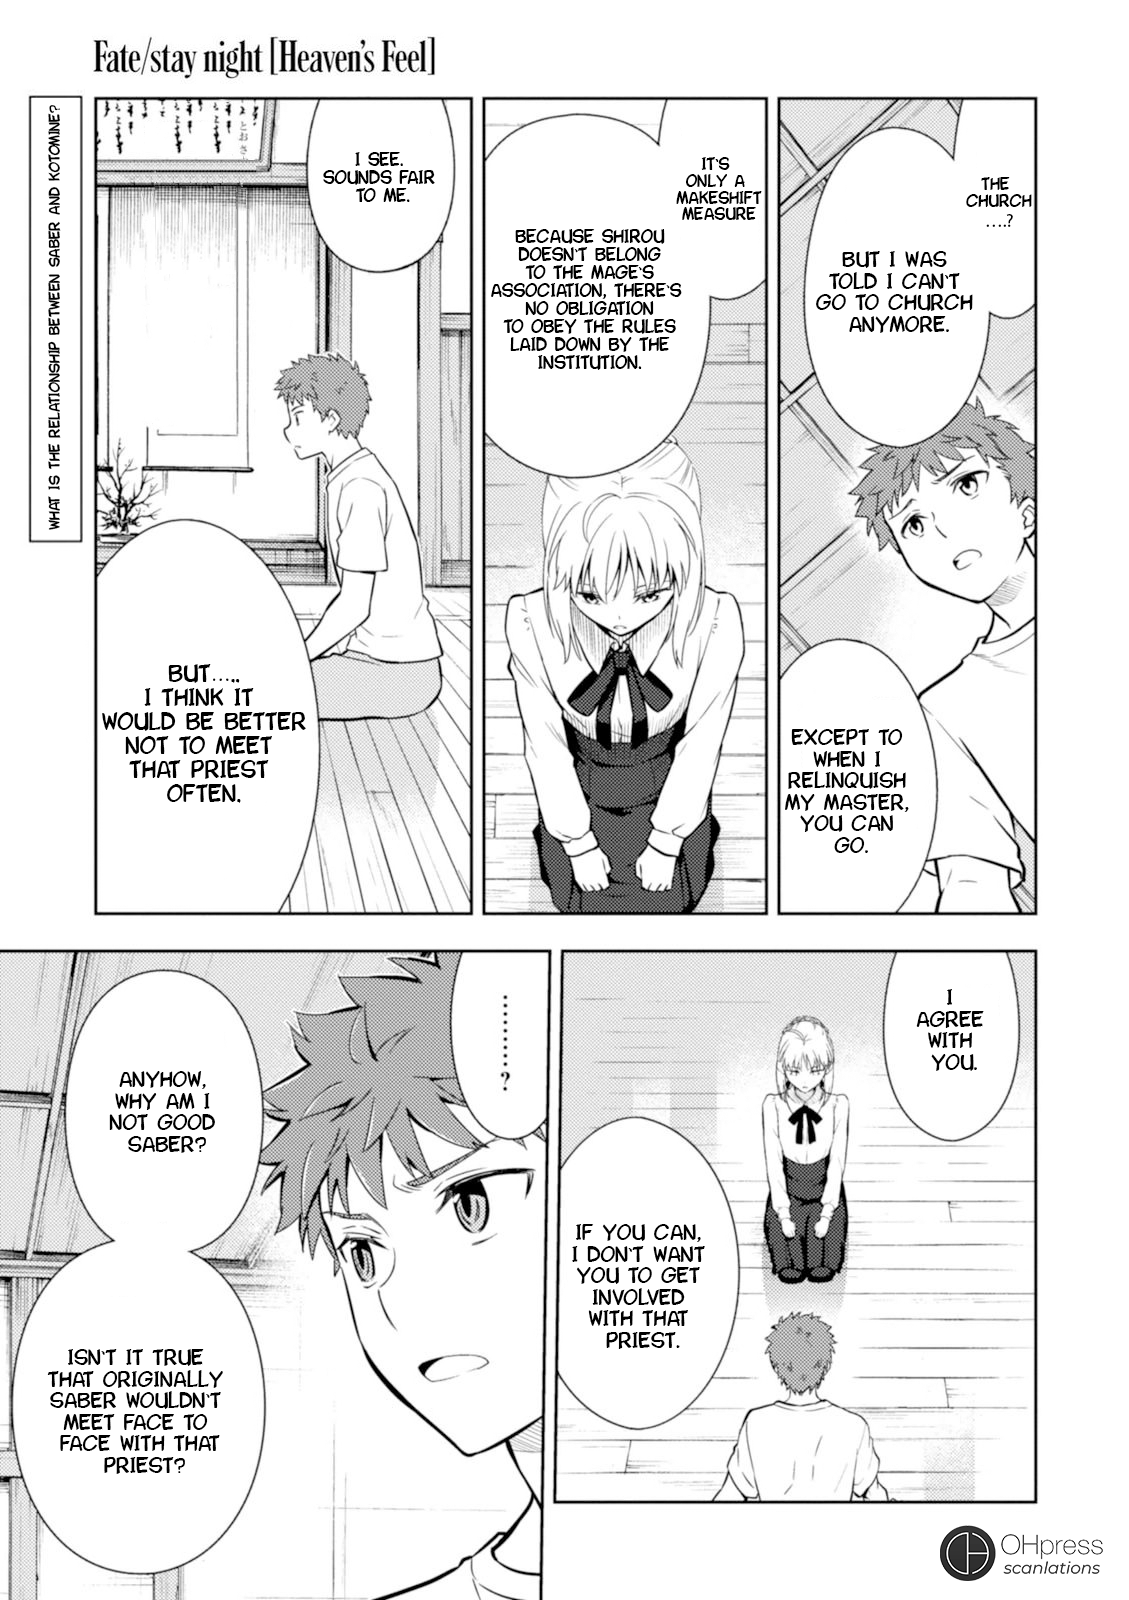 Fate/stay Night - Heaven's Feel Vol.3 Chapter 14: Day 4 / The Holy Grail War, And It S Beginning (3) - Picture 2